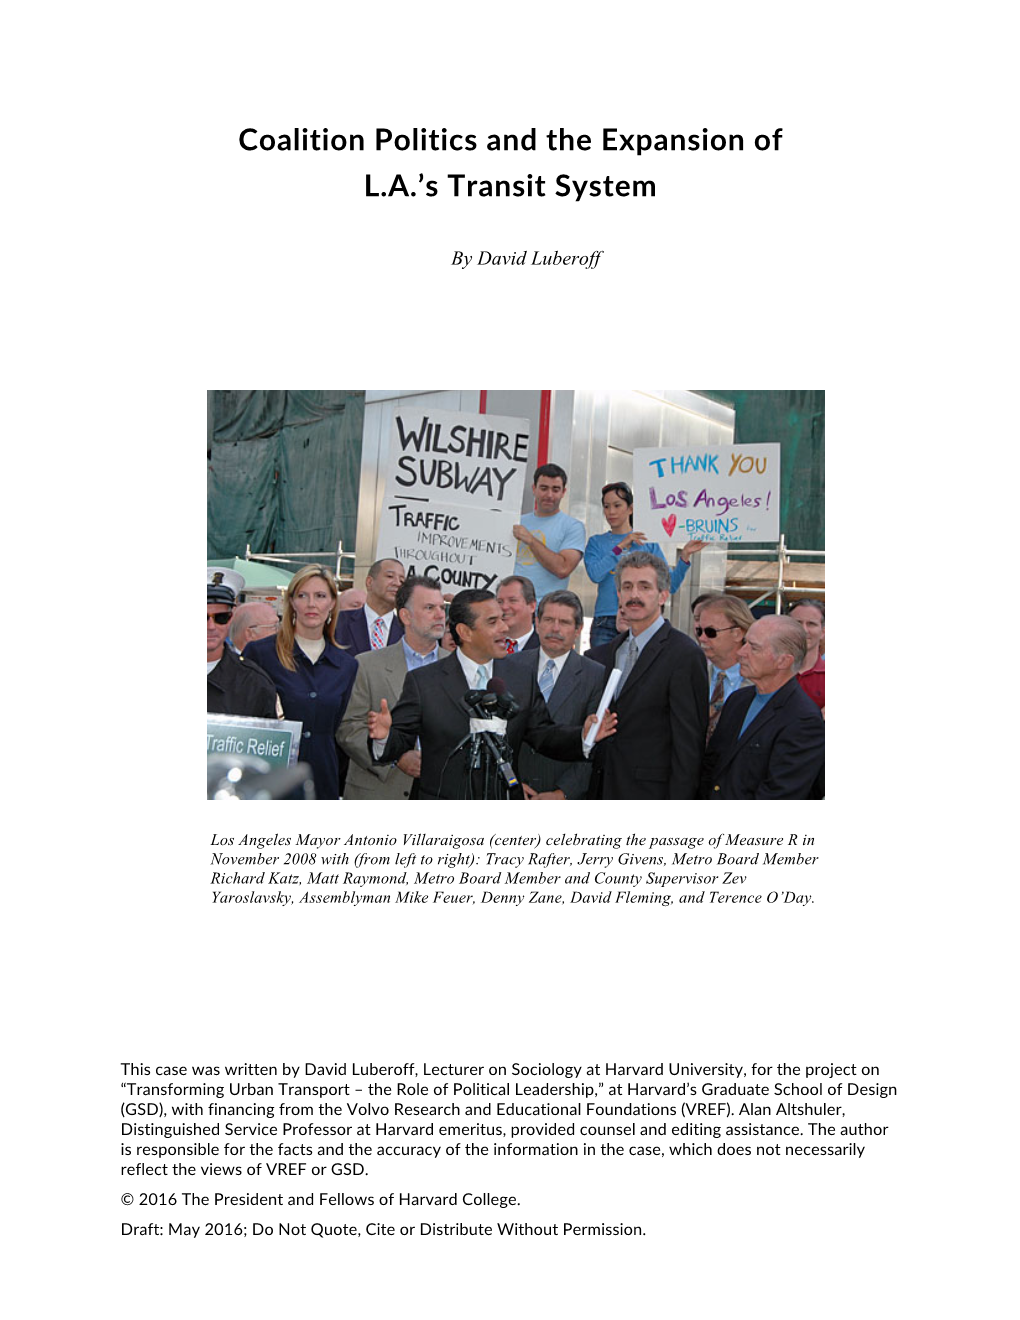 Coalition Politics and the Expansion of L.A.'S Transit System